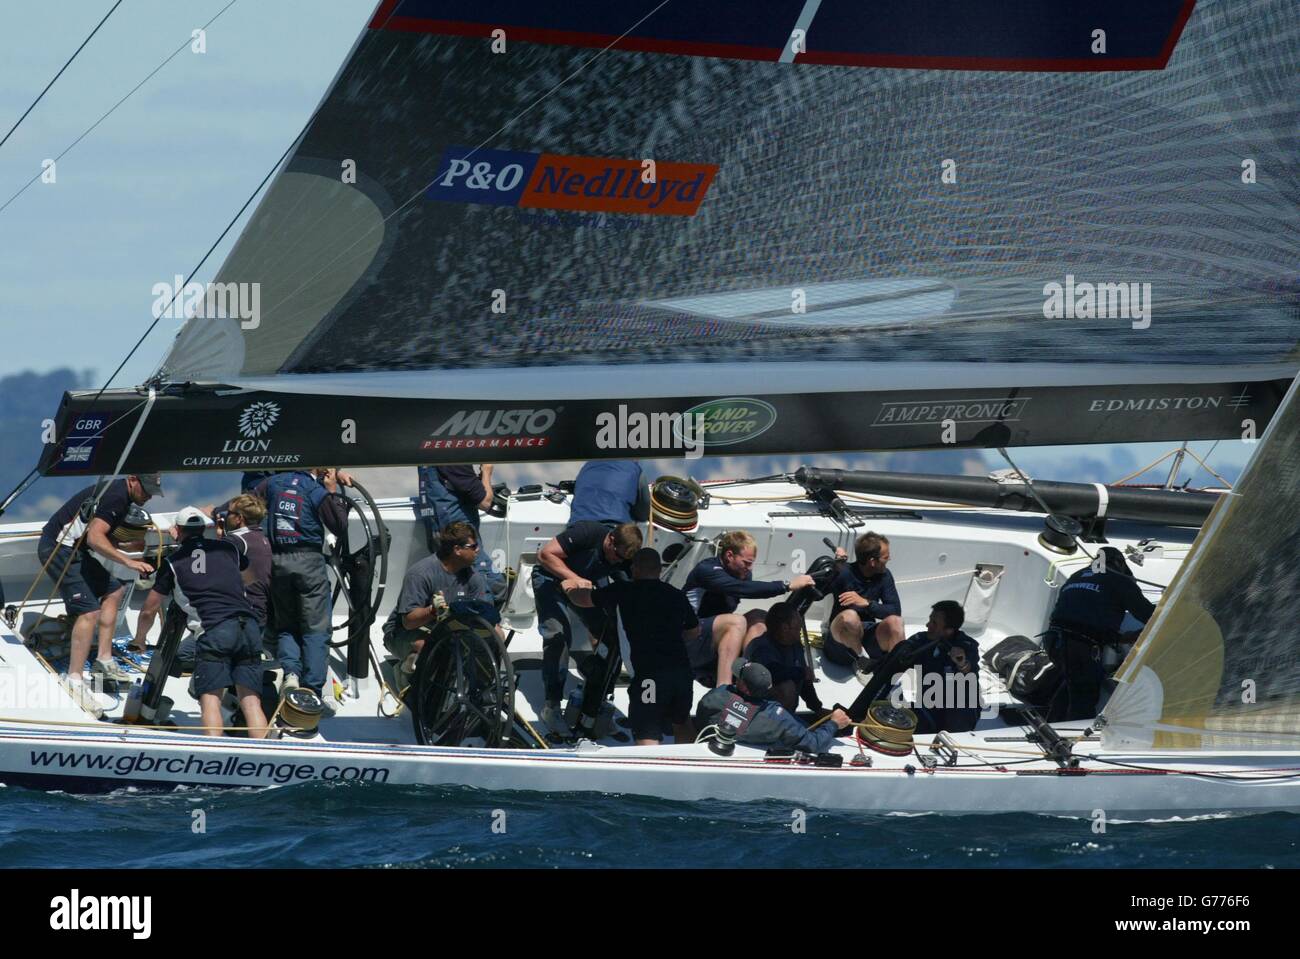 Britain's America's Cup yacht Stock Photo